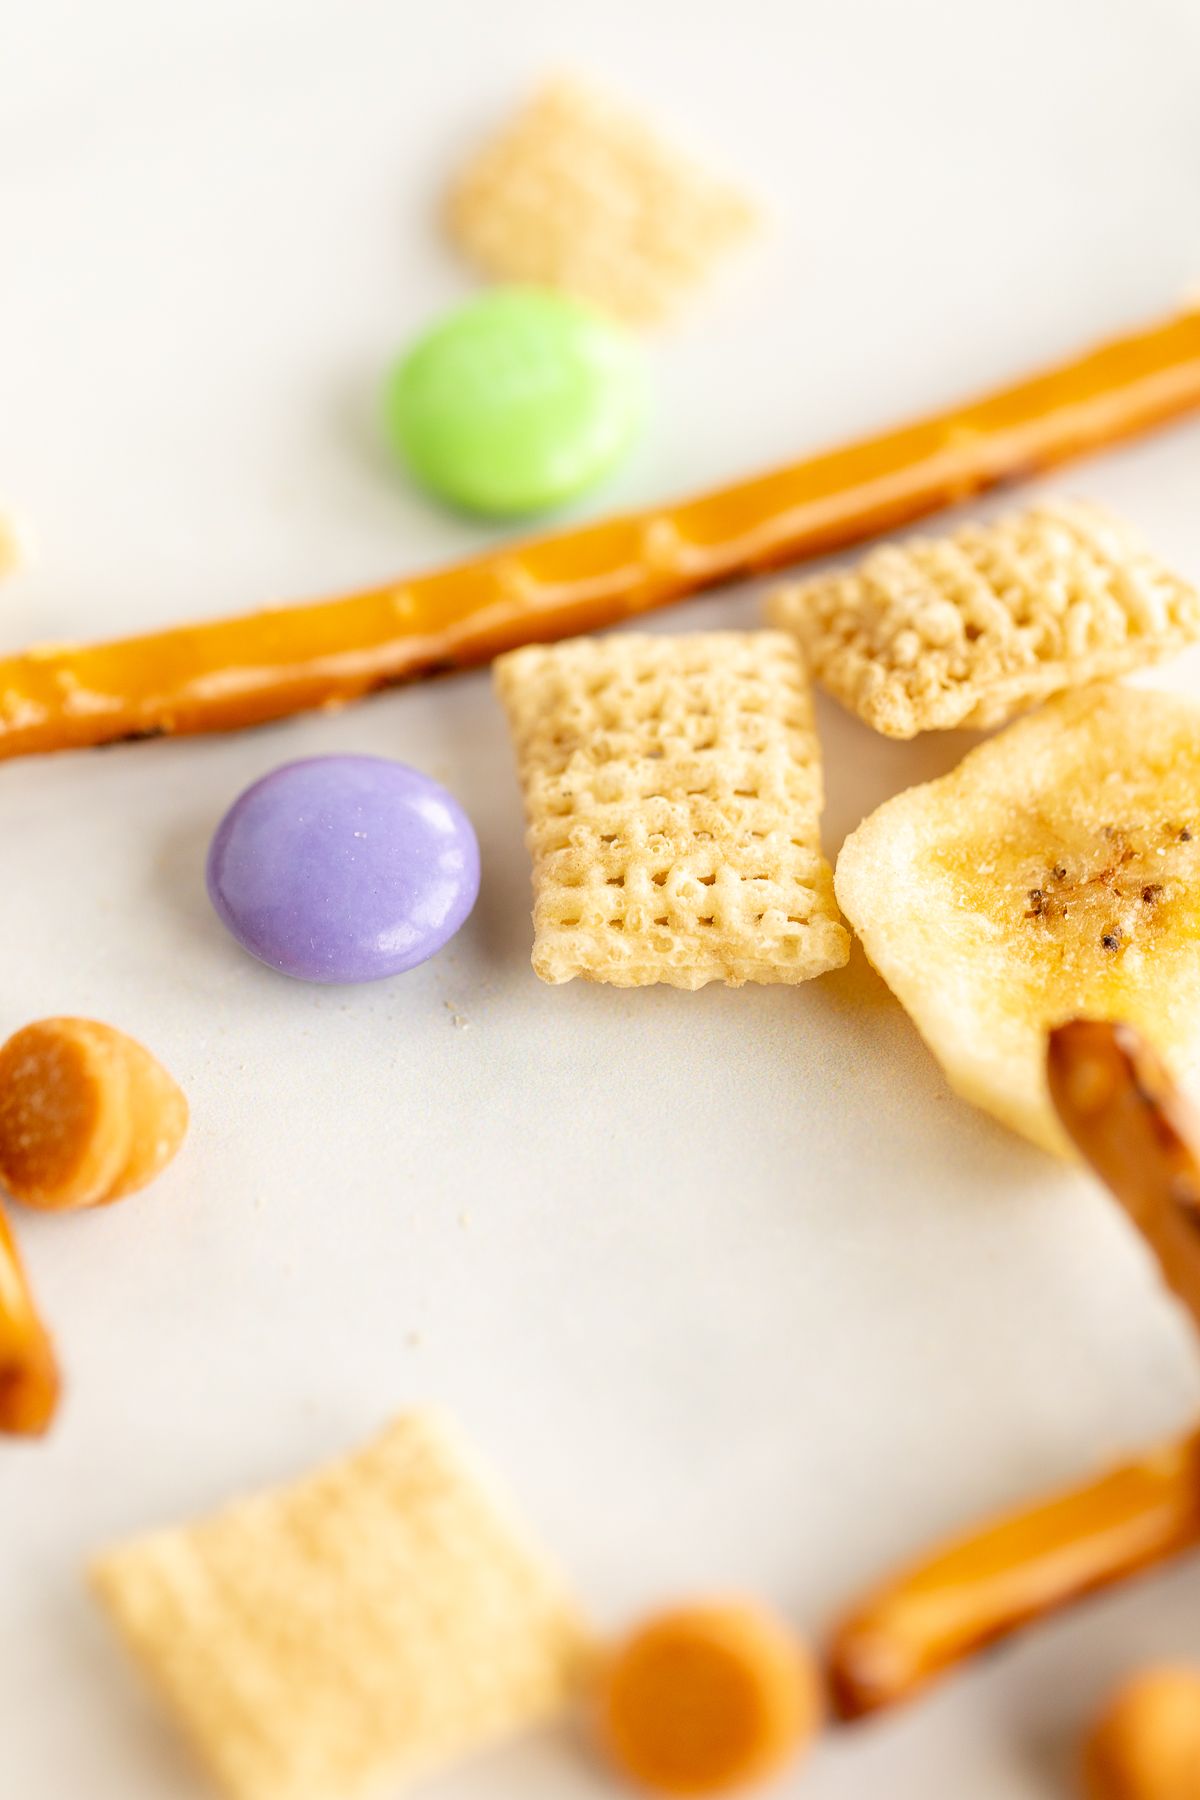 Dried banana chips, pretzels, candy and cereal on a white surface